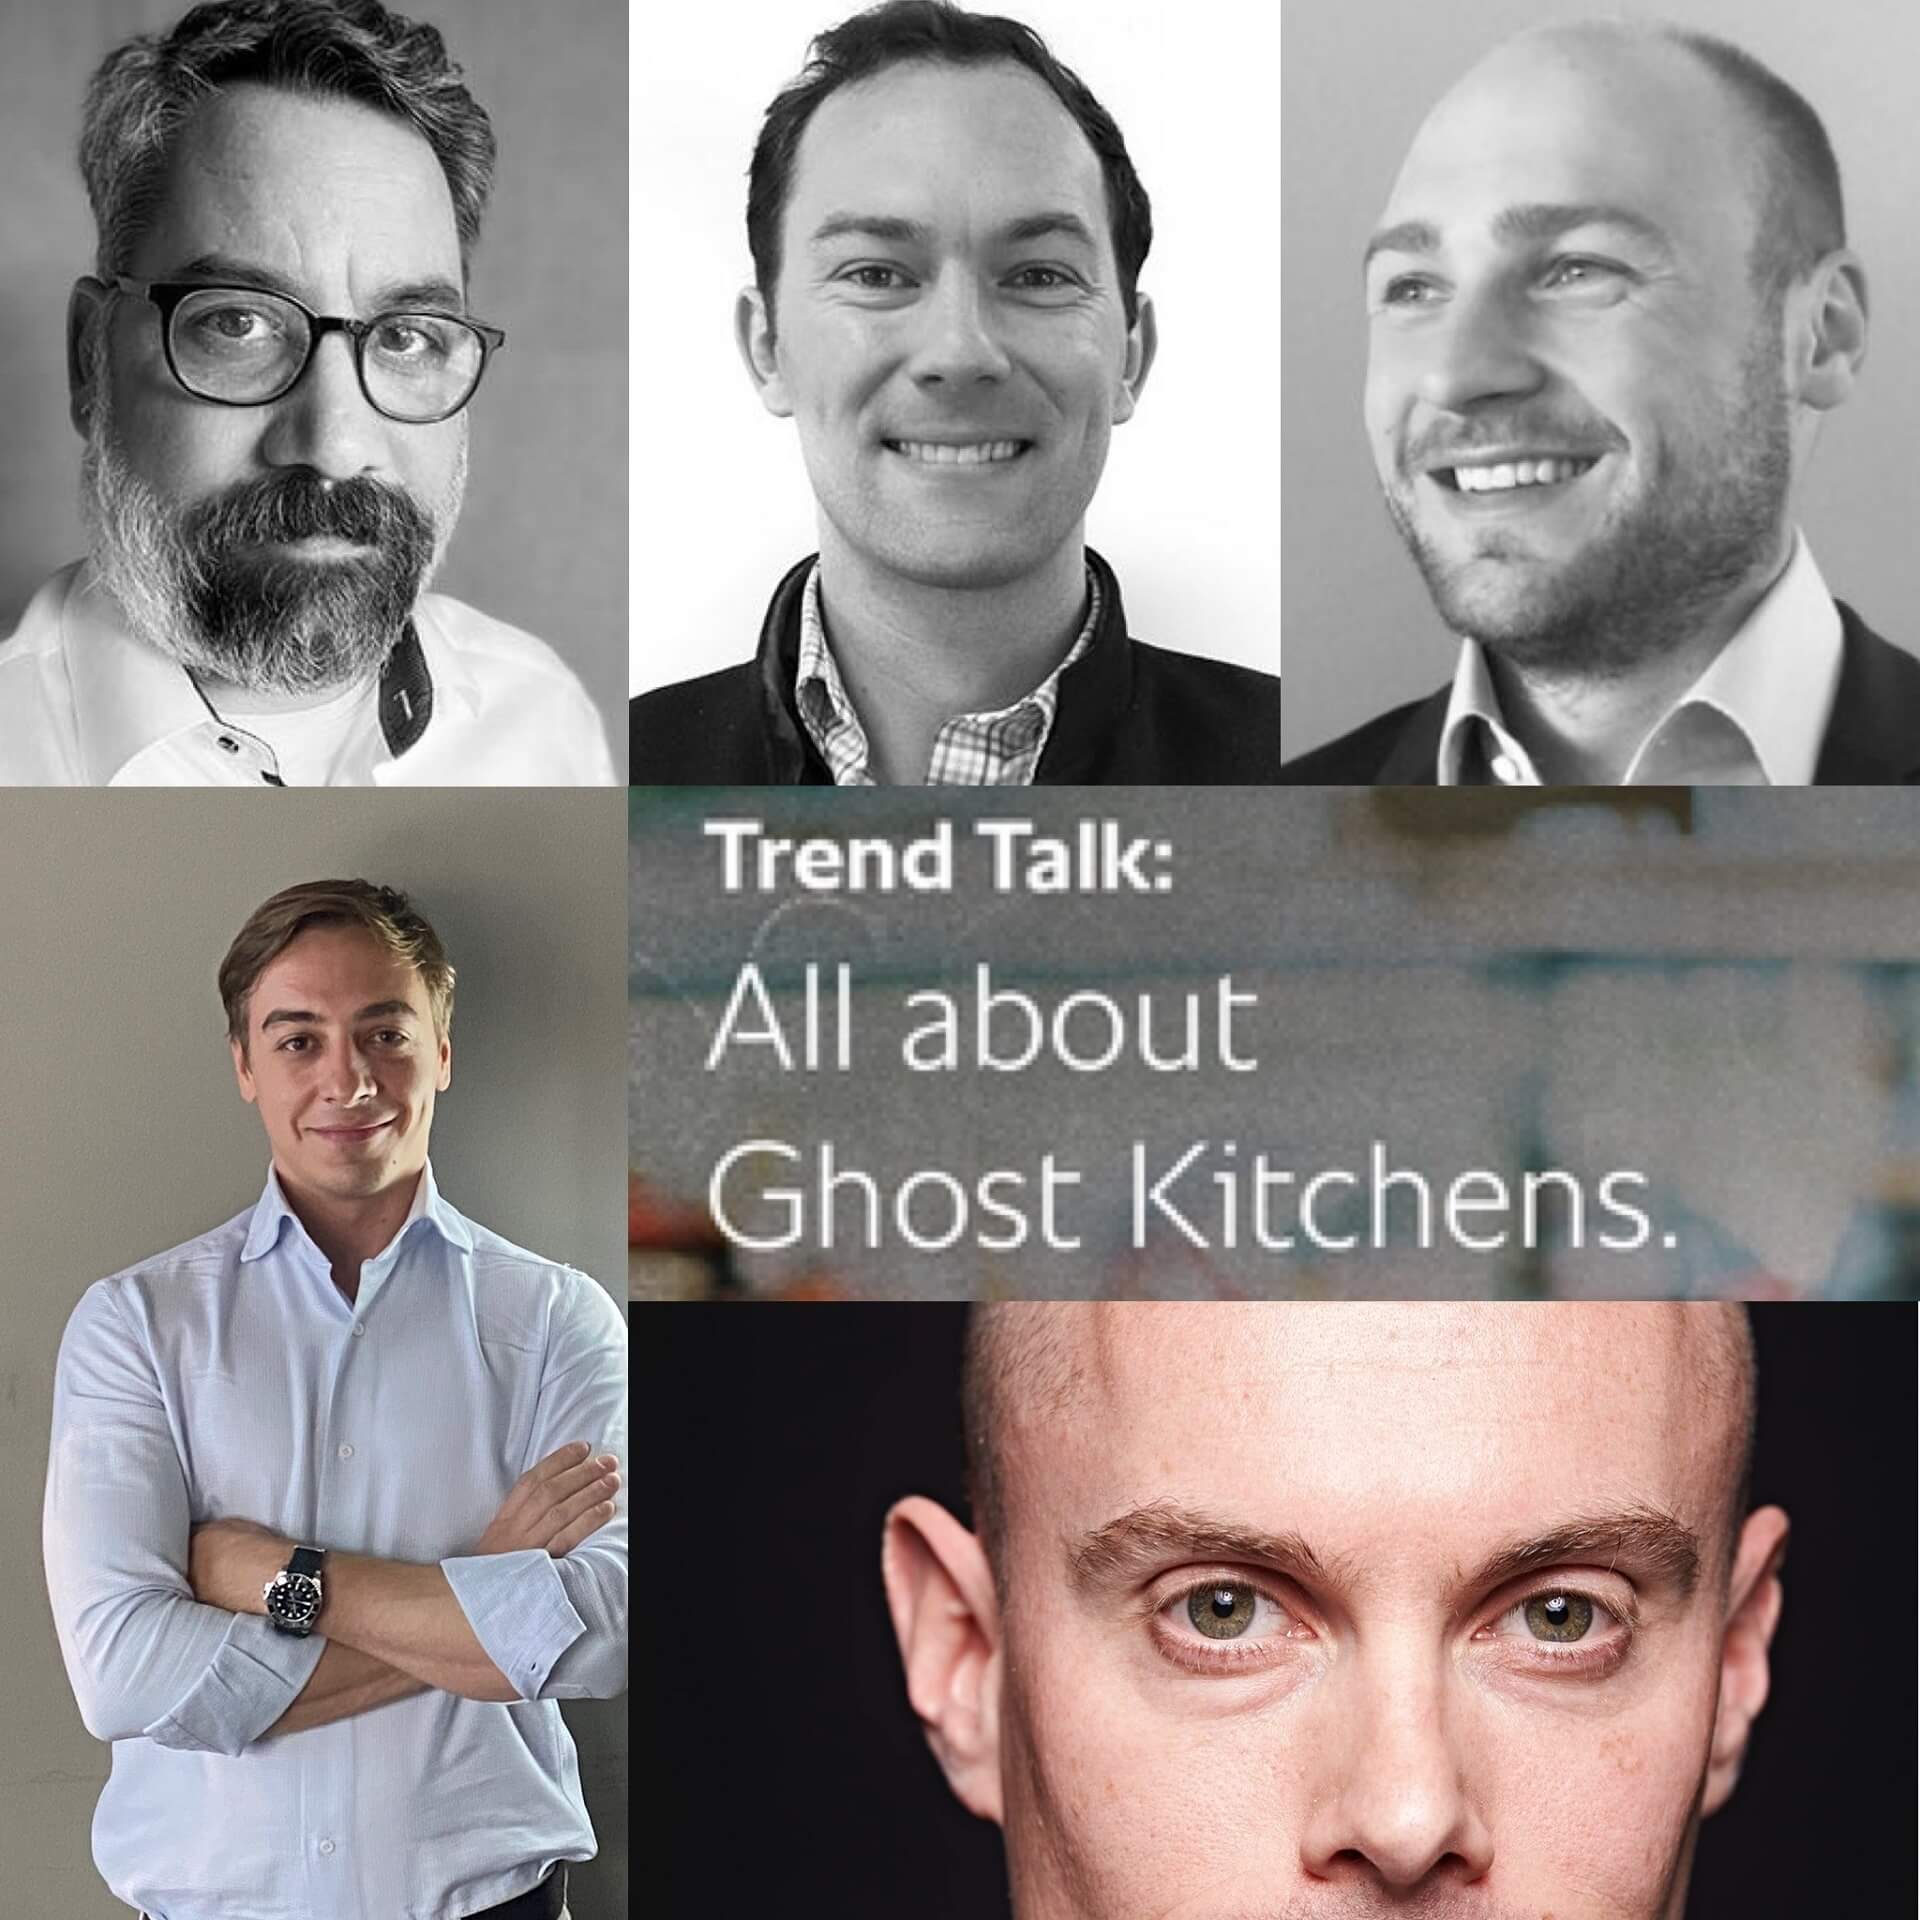 Who were the speakers of Rational's fourth Trend Talk?